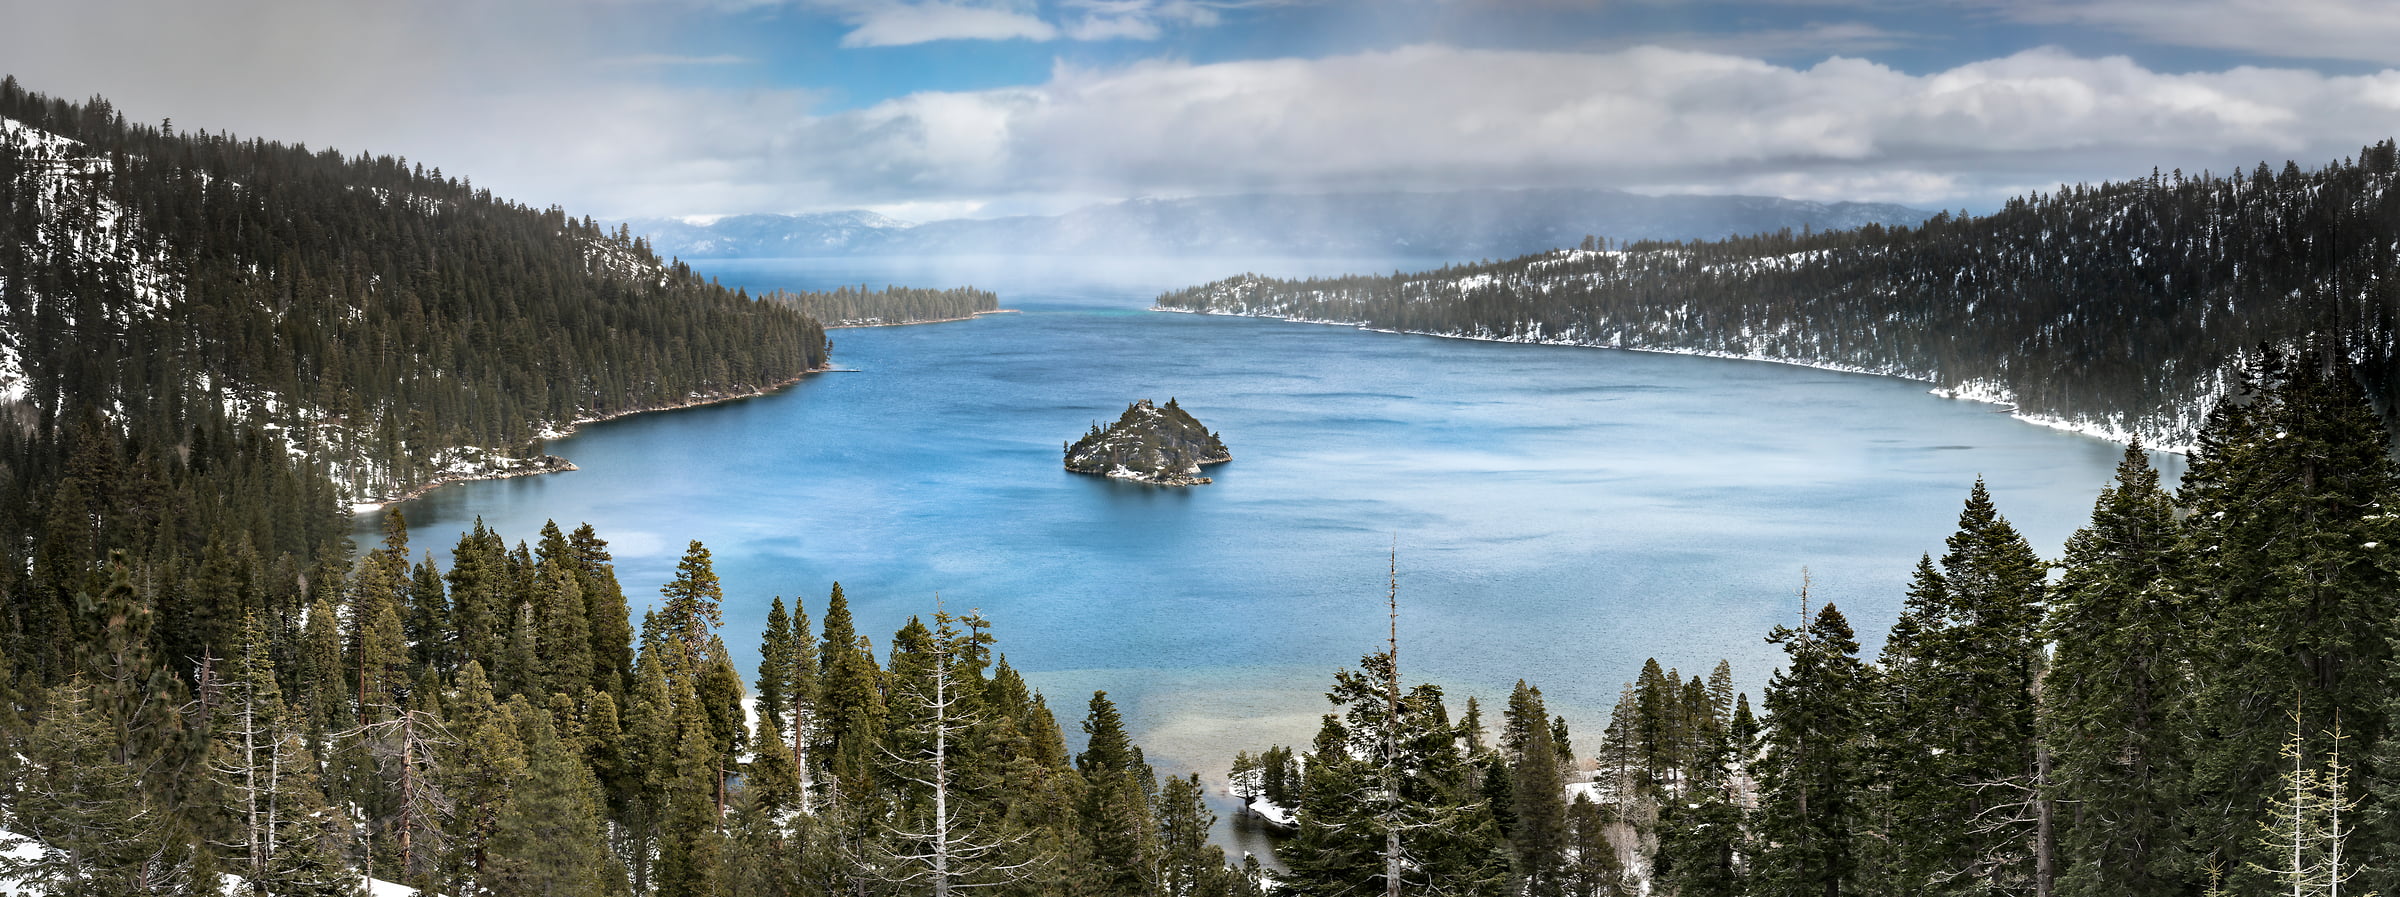 341 megapixels! A very high resolution, large-format VAST photo of Emerald Bay in Lake Tahoe in winter with snow; fine art landscape photograph created by Justin Katz in California